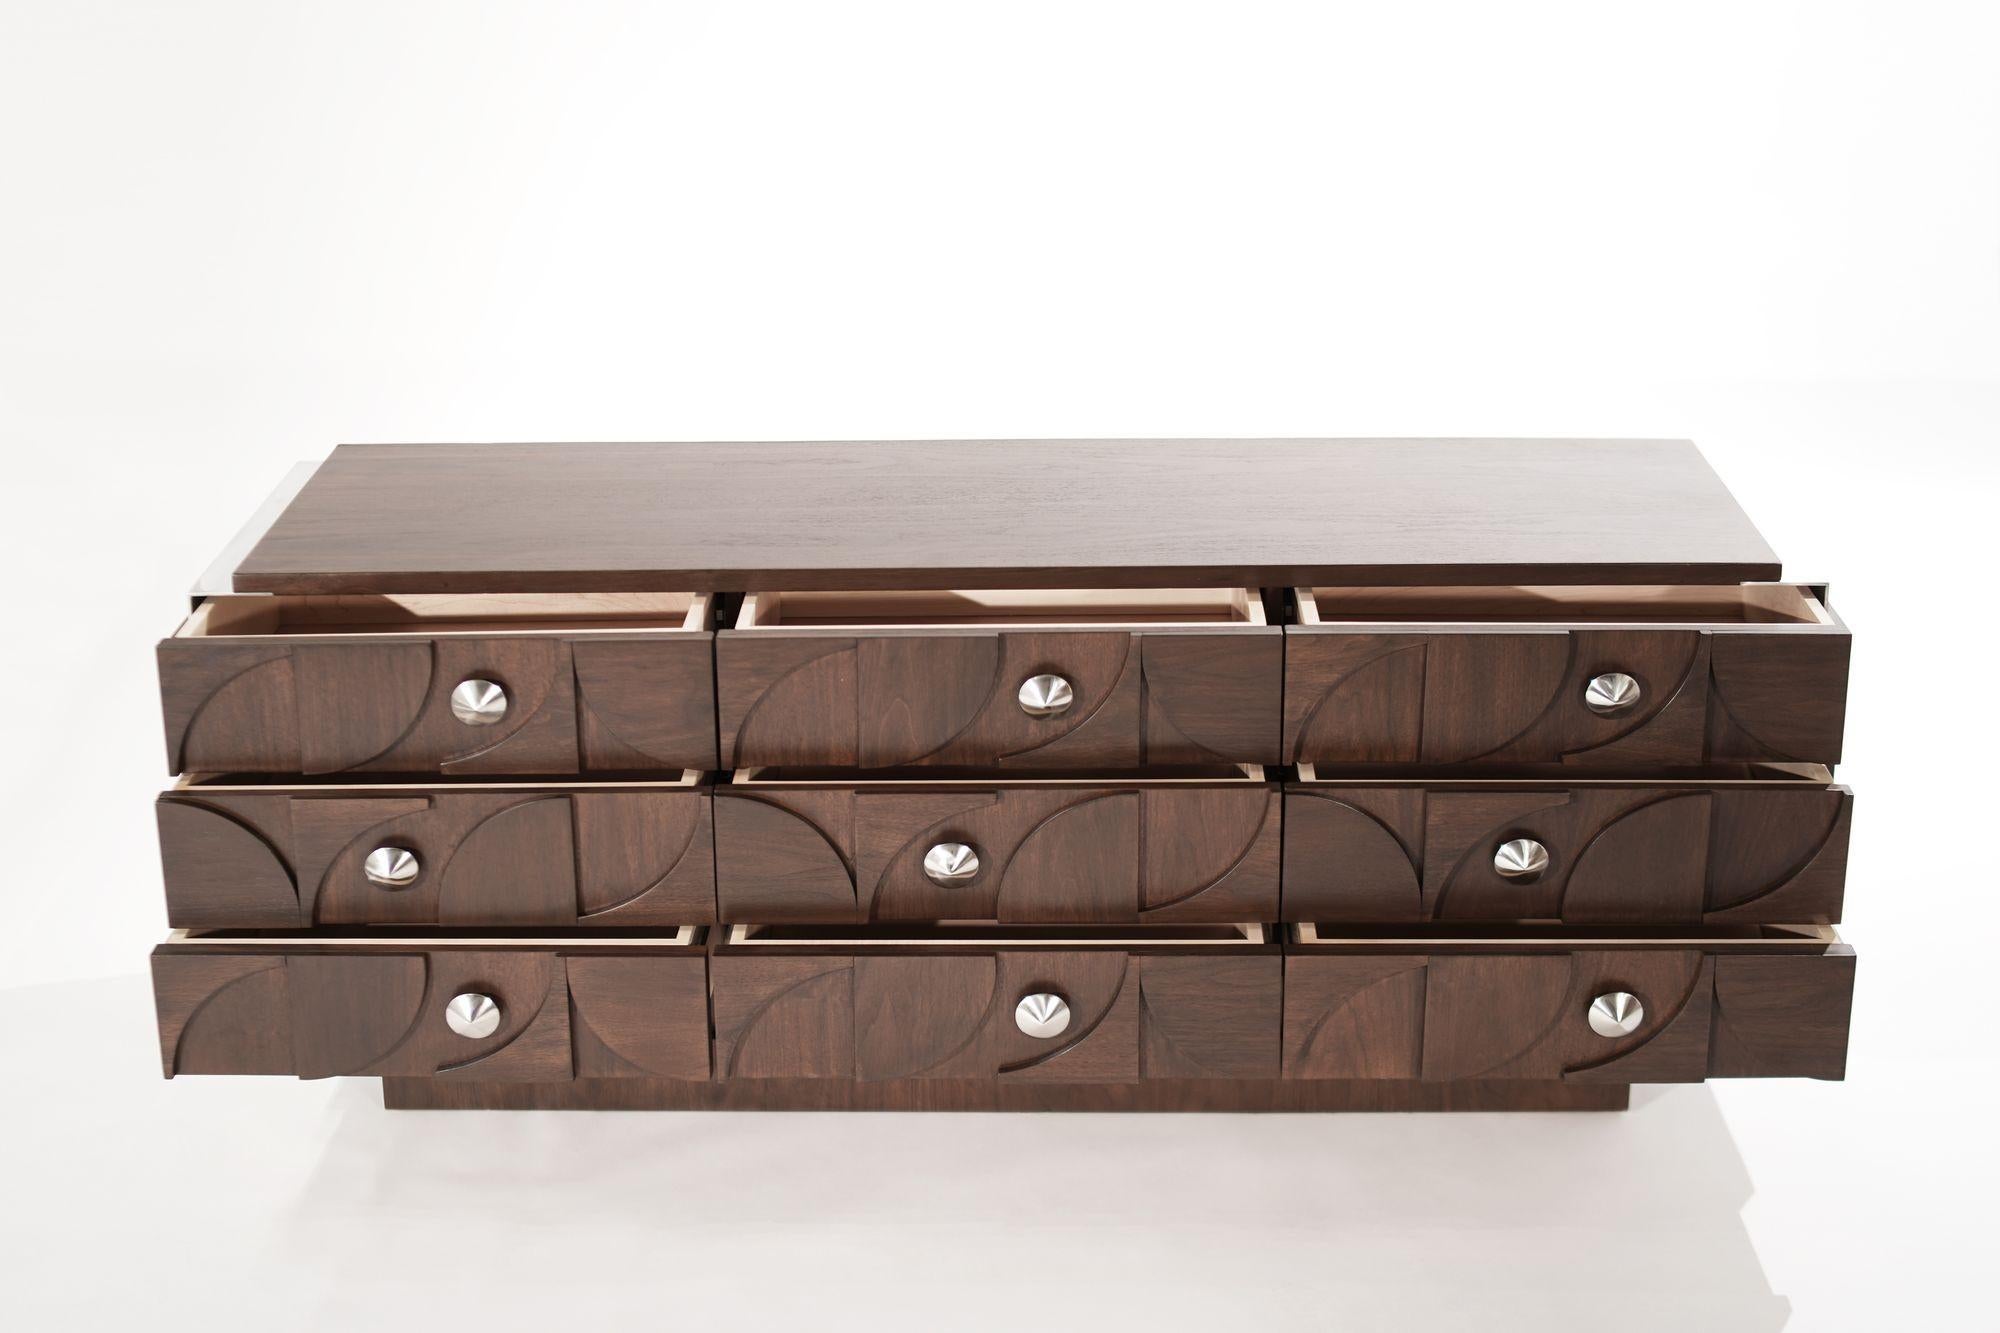 Brutalist Walnut Dresser with Nickel Accents, C. 1960s For Sale 1